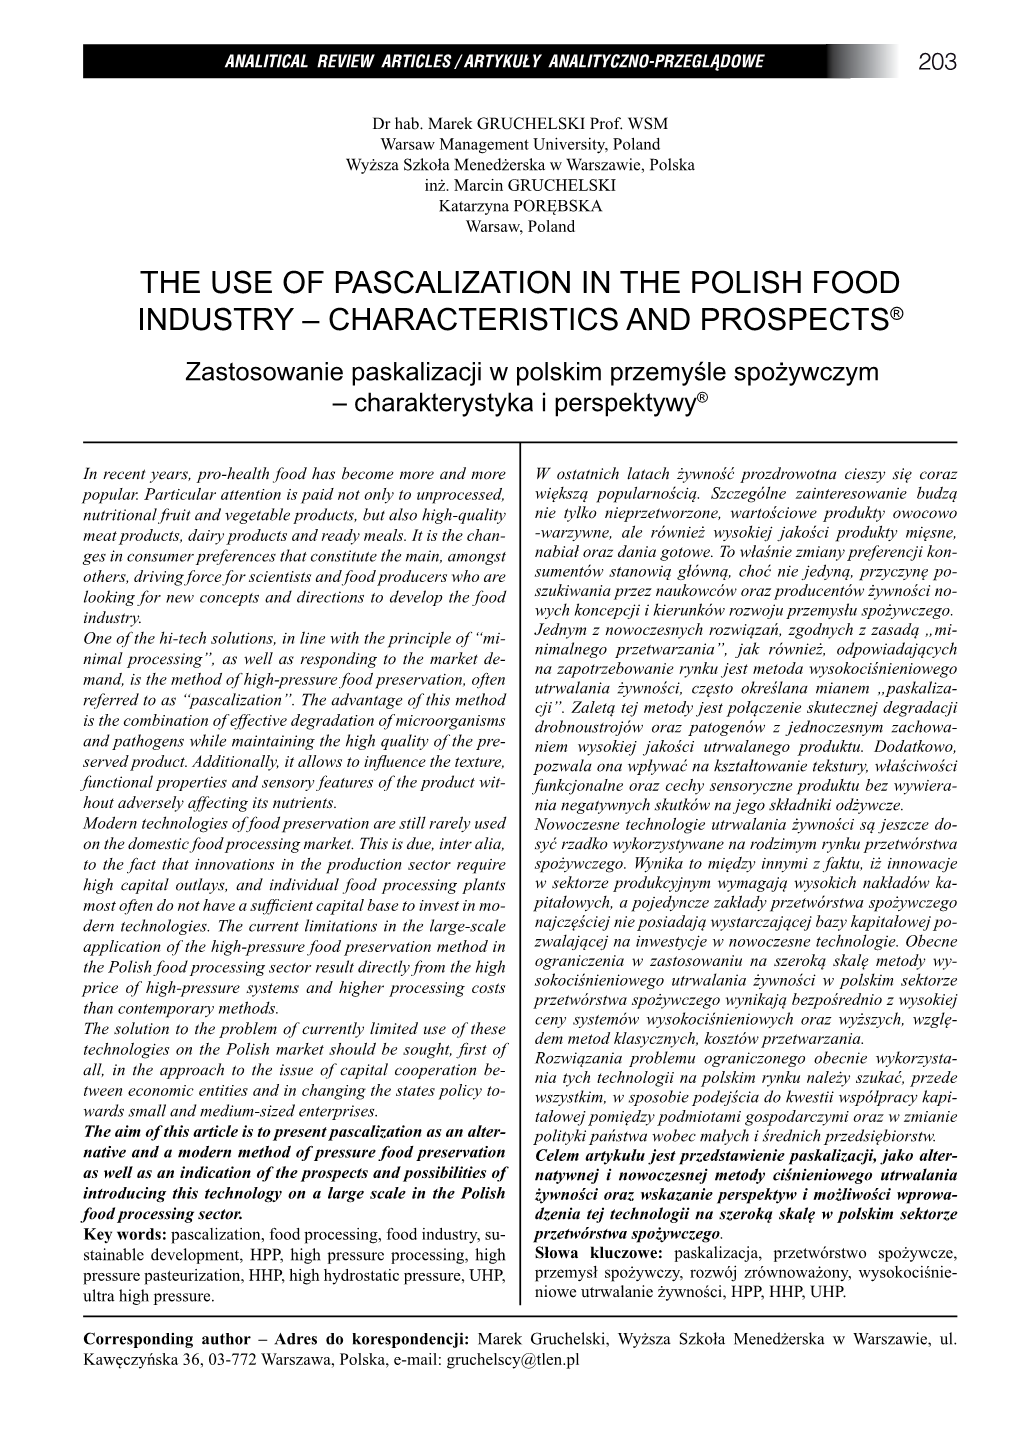 The Use of Pascalization in the Polish Food Industry